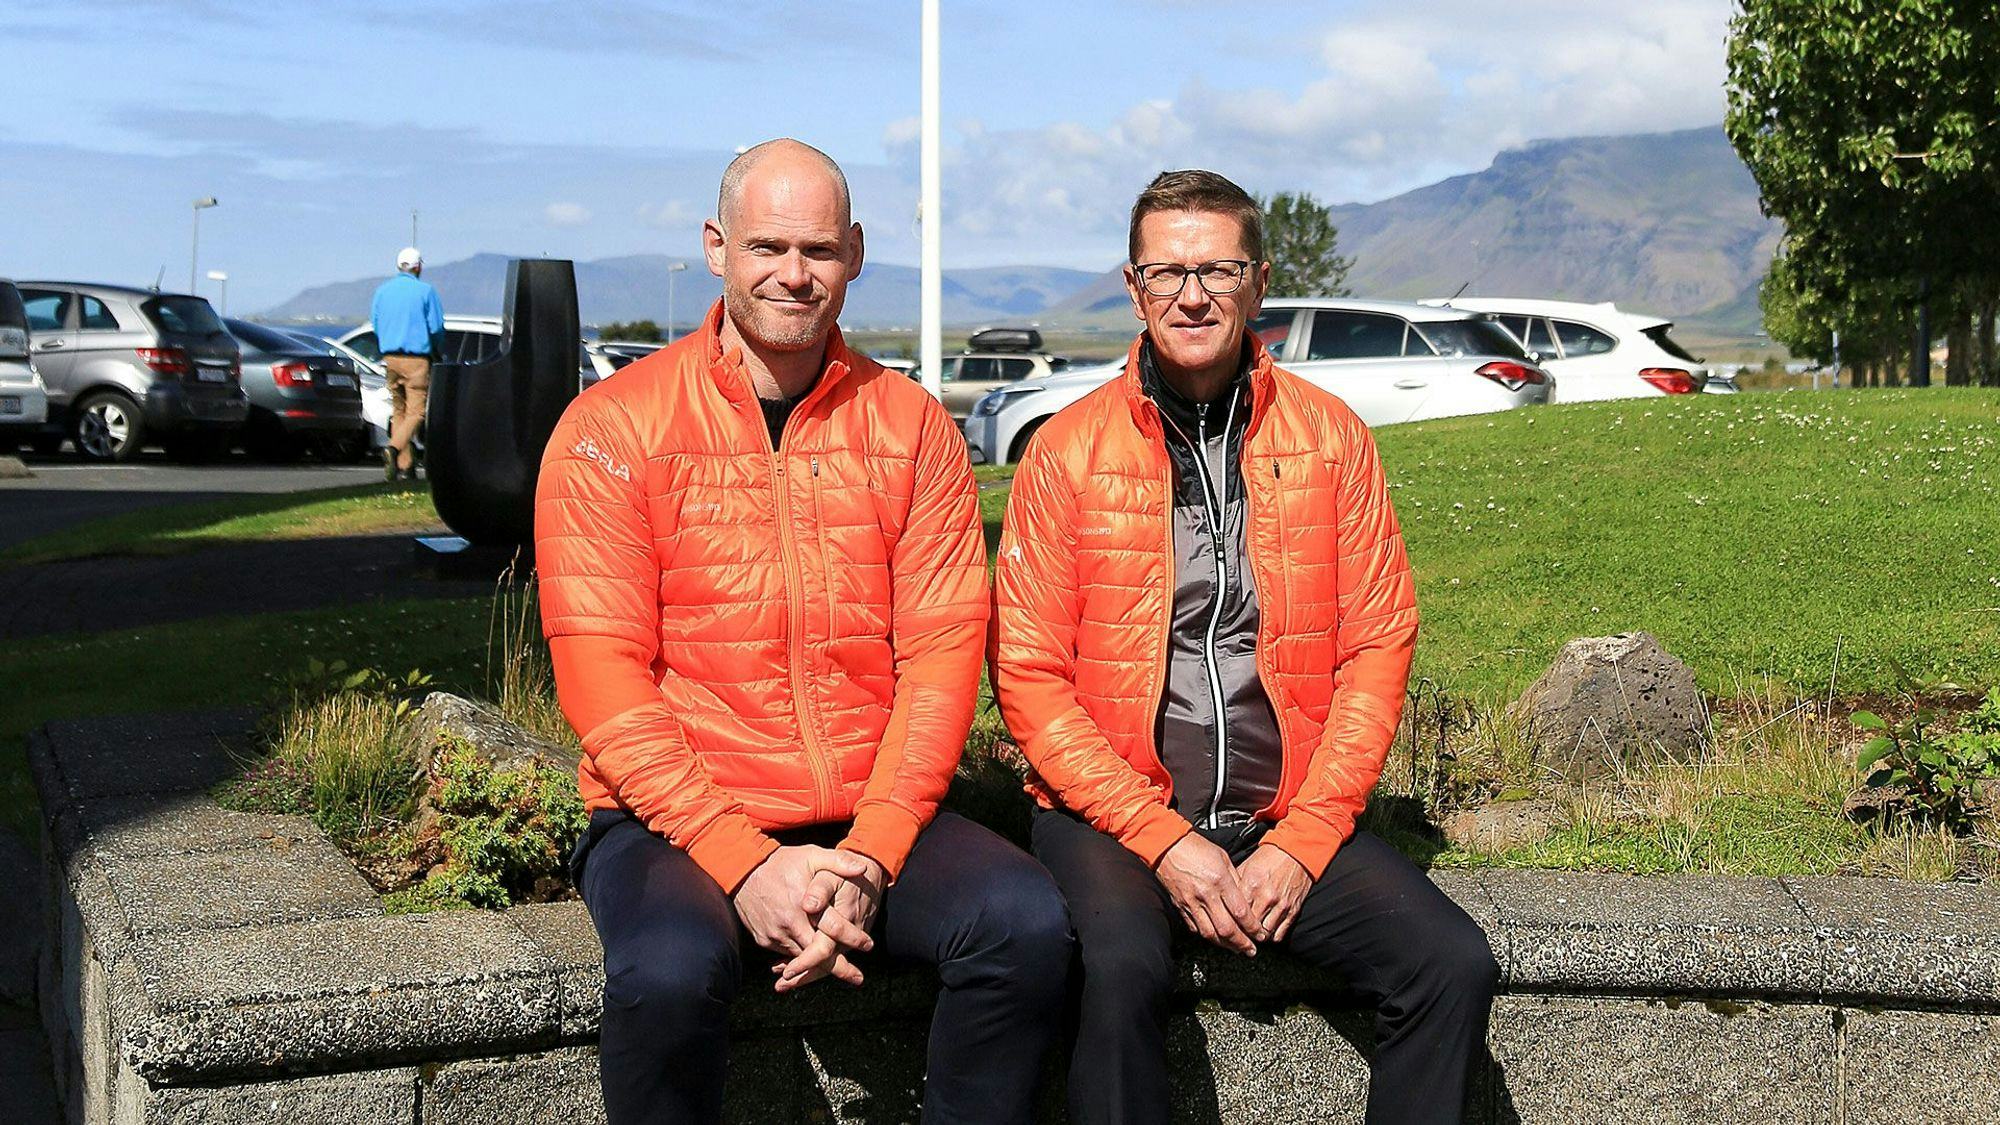 Two men in matching bright orange jacket seated outdoor